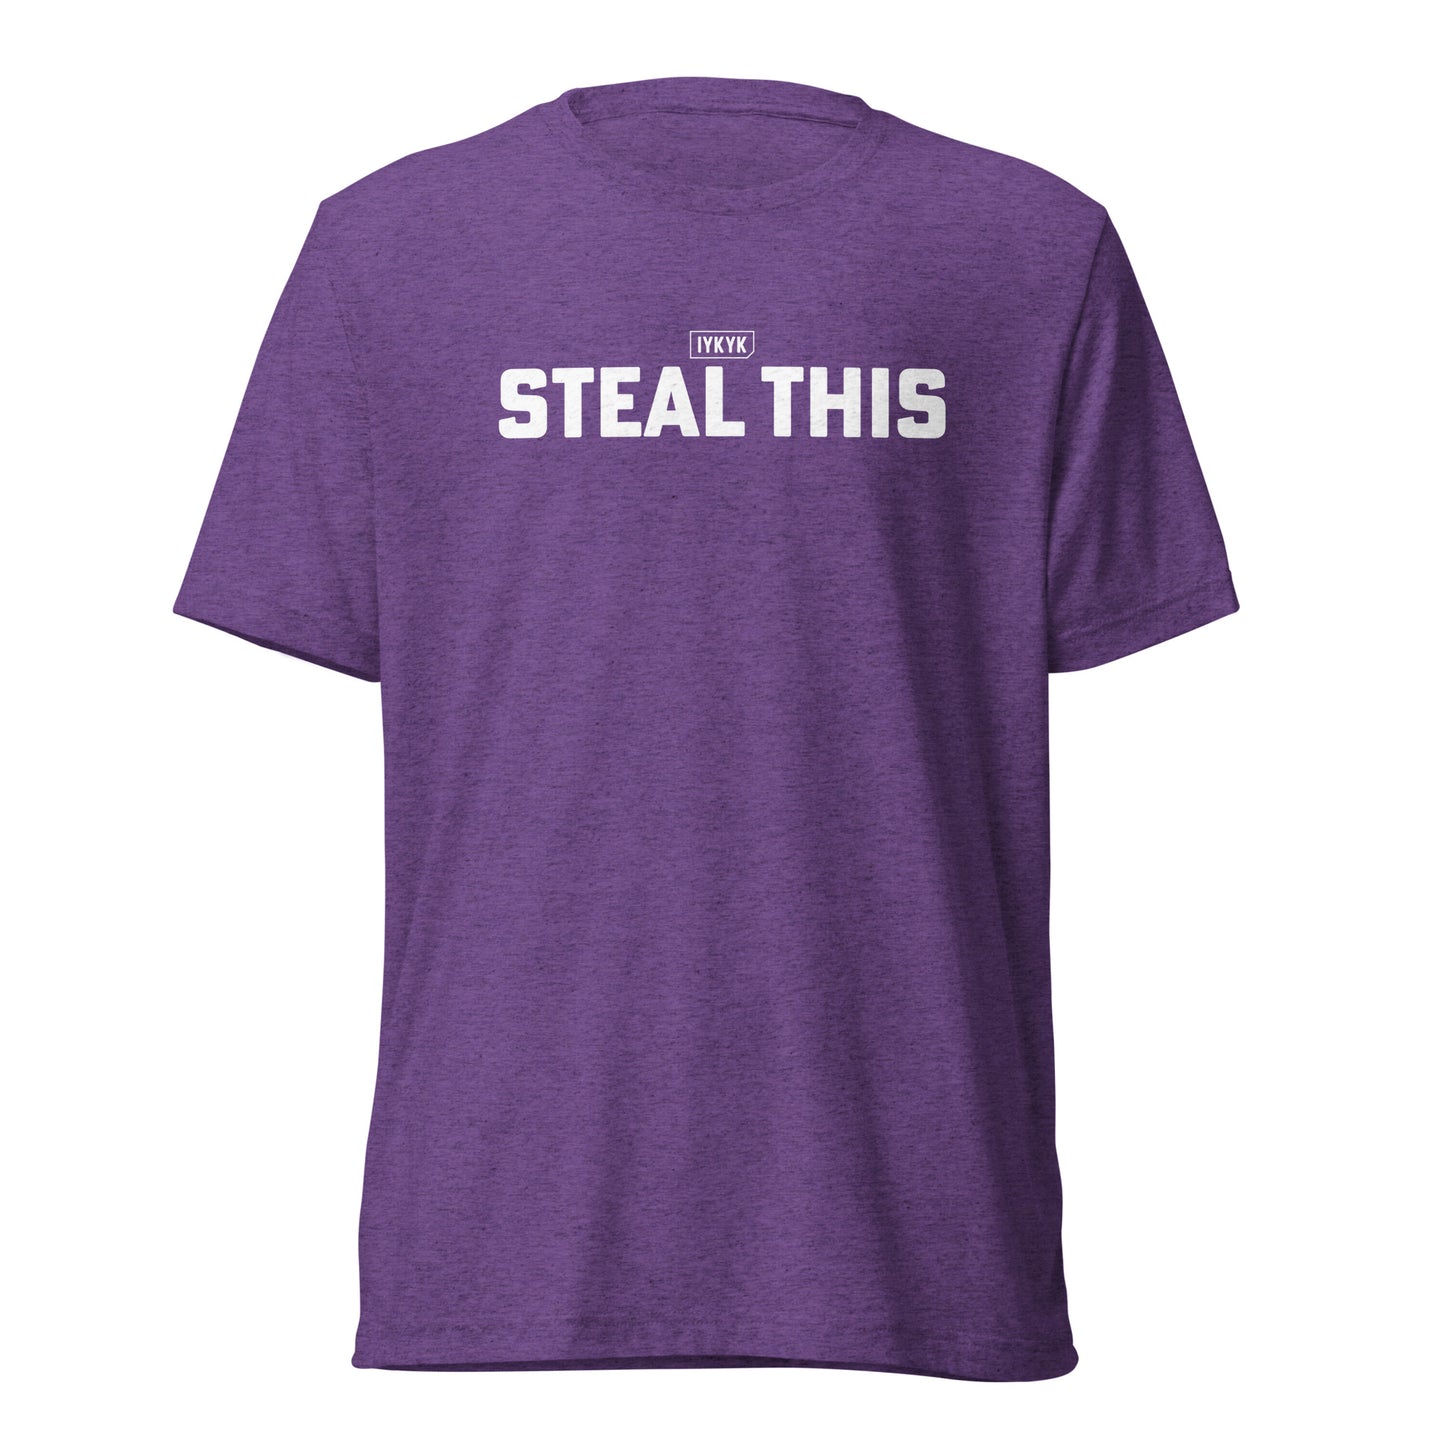 Premium Everyday Steal This Sign Stealing Tee